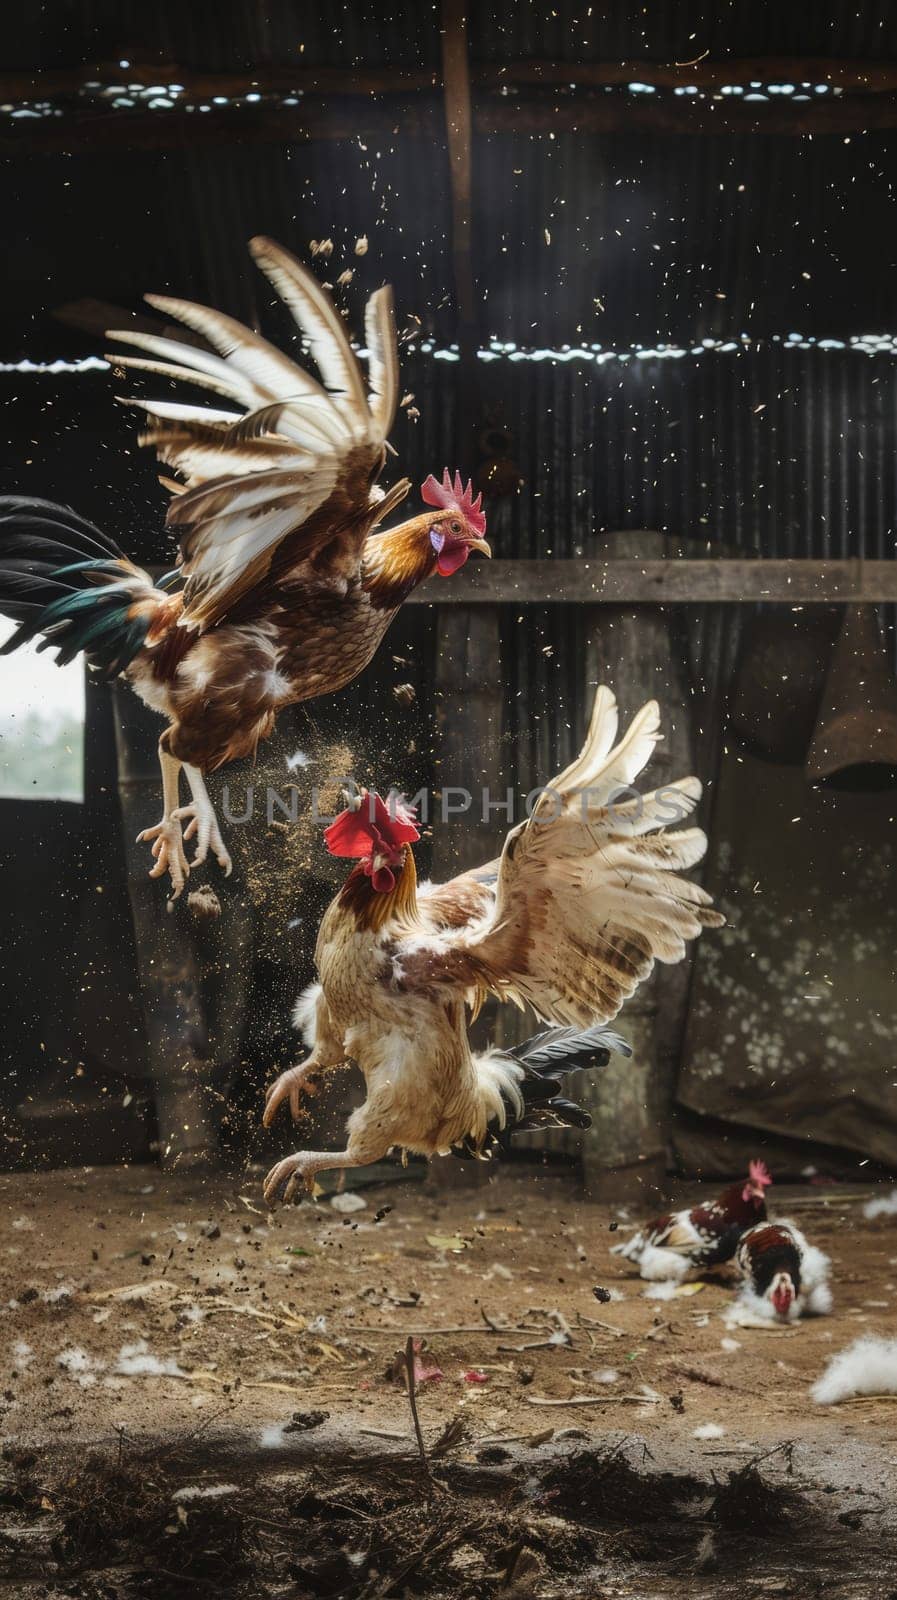 Two roosters in mid-air combat, feathers flying, inside a rustic barn with sunlight streaming through gaps